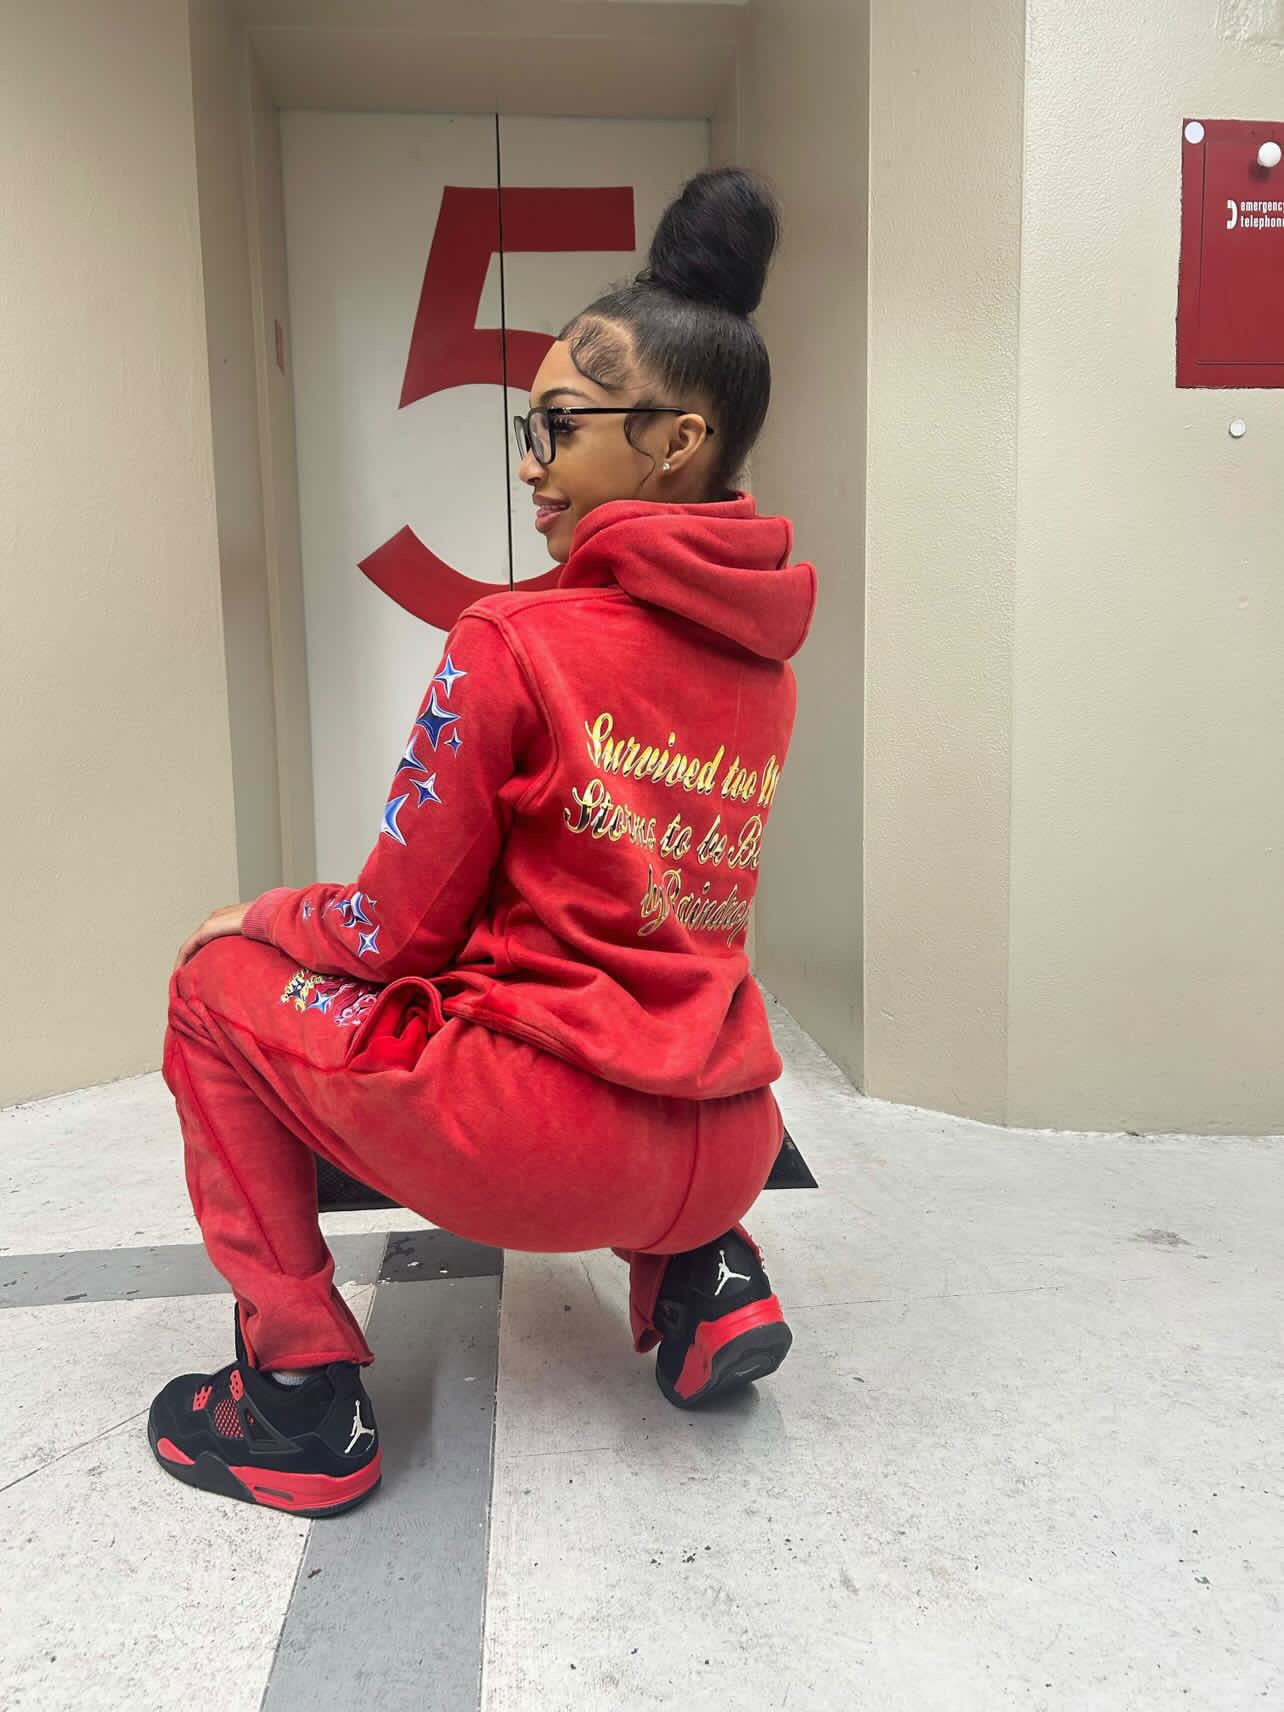 RS LIM. EDITION SWEATSUIT - RED (FULL SET)